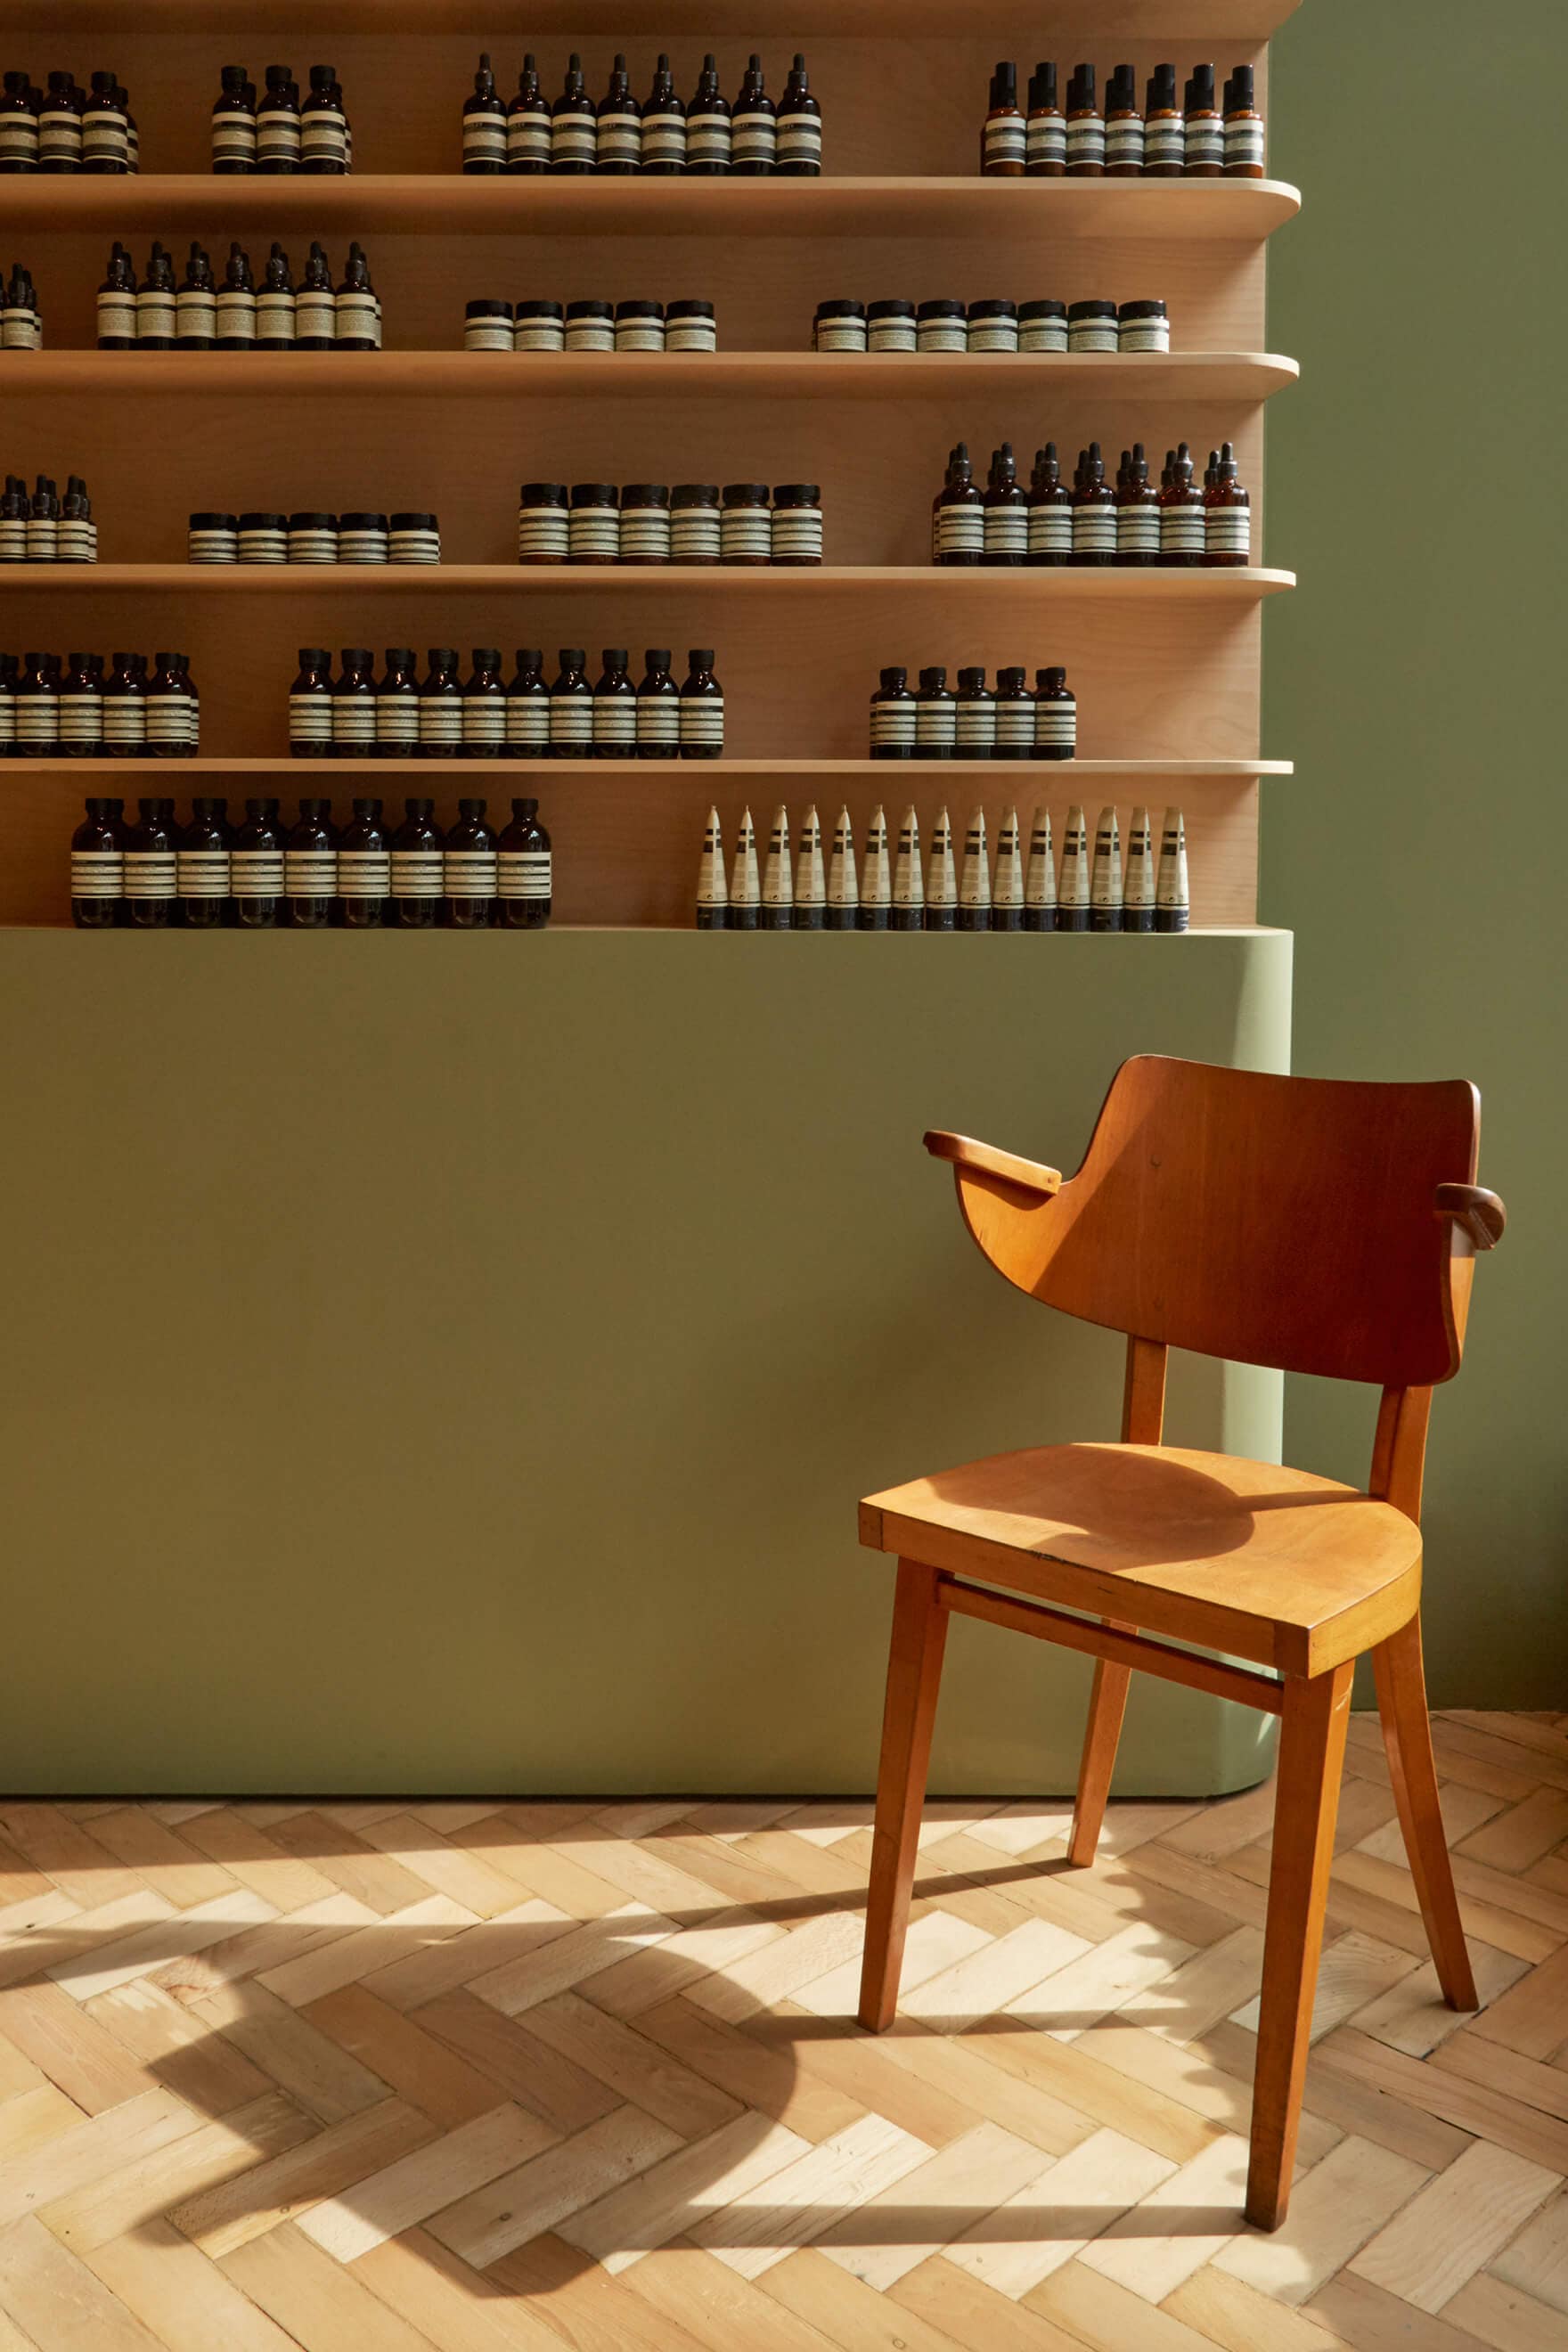 Aesop store, product on shelves, chair